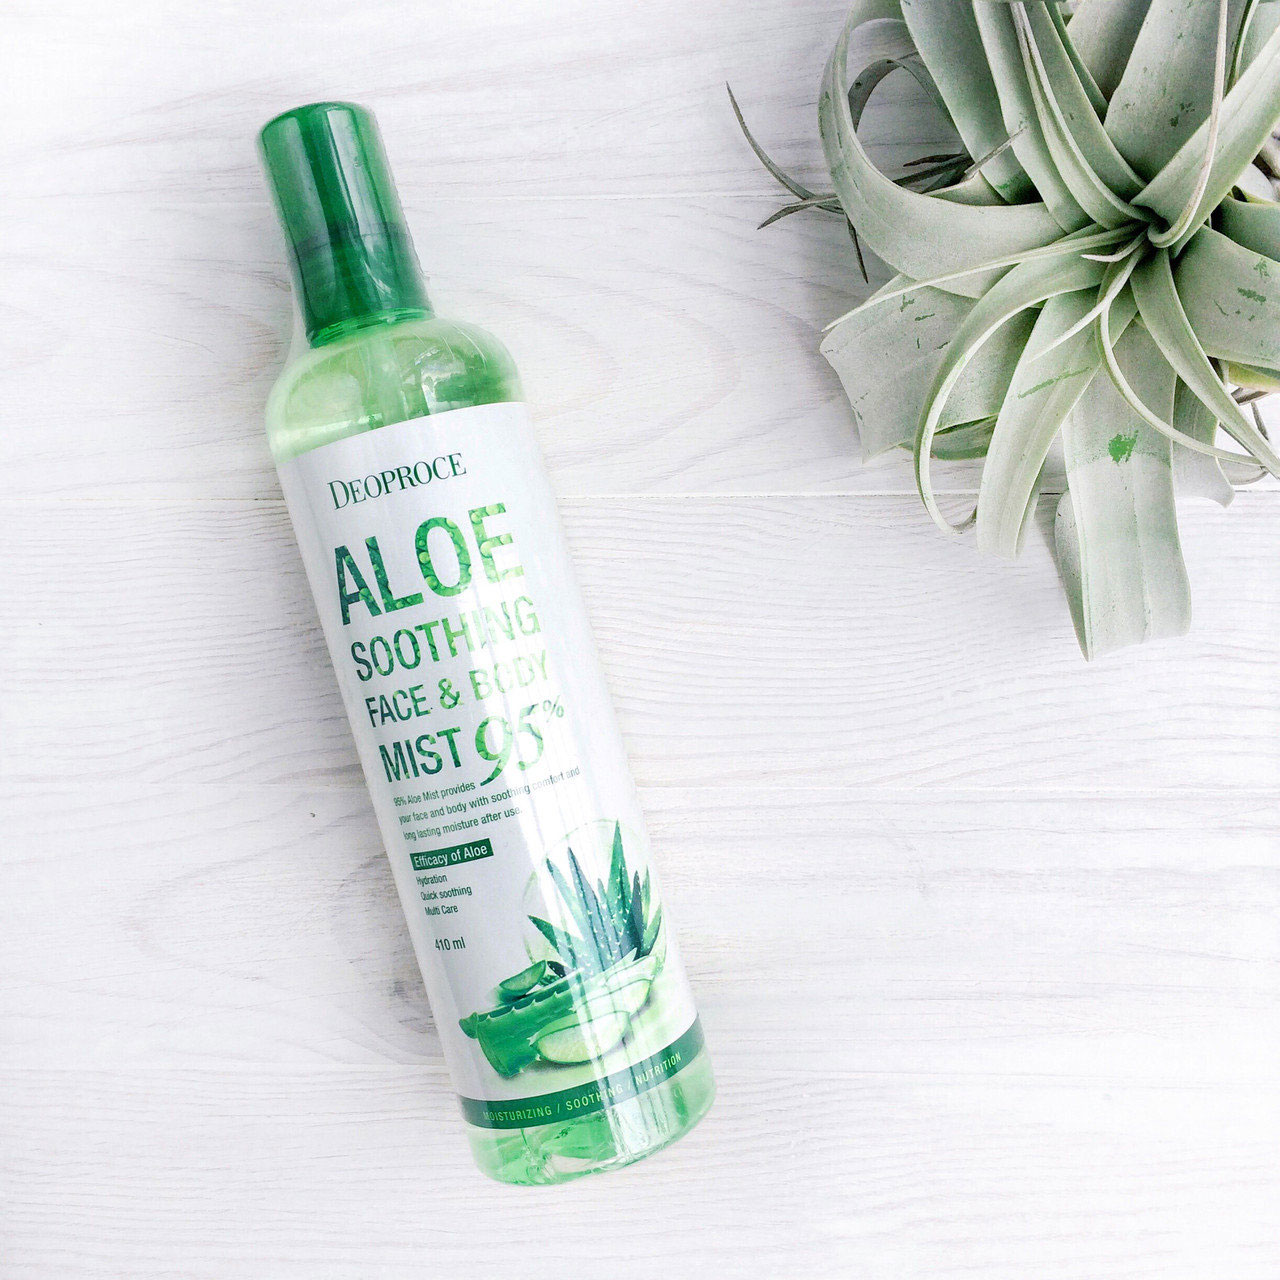 Deoproce 95% Aloe Soothing Face & Body Mist